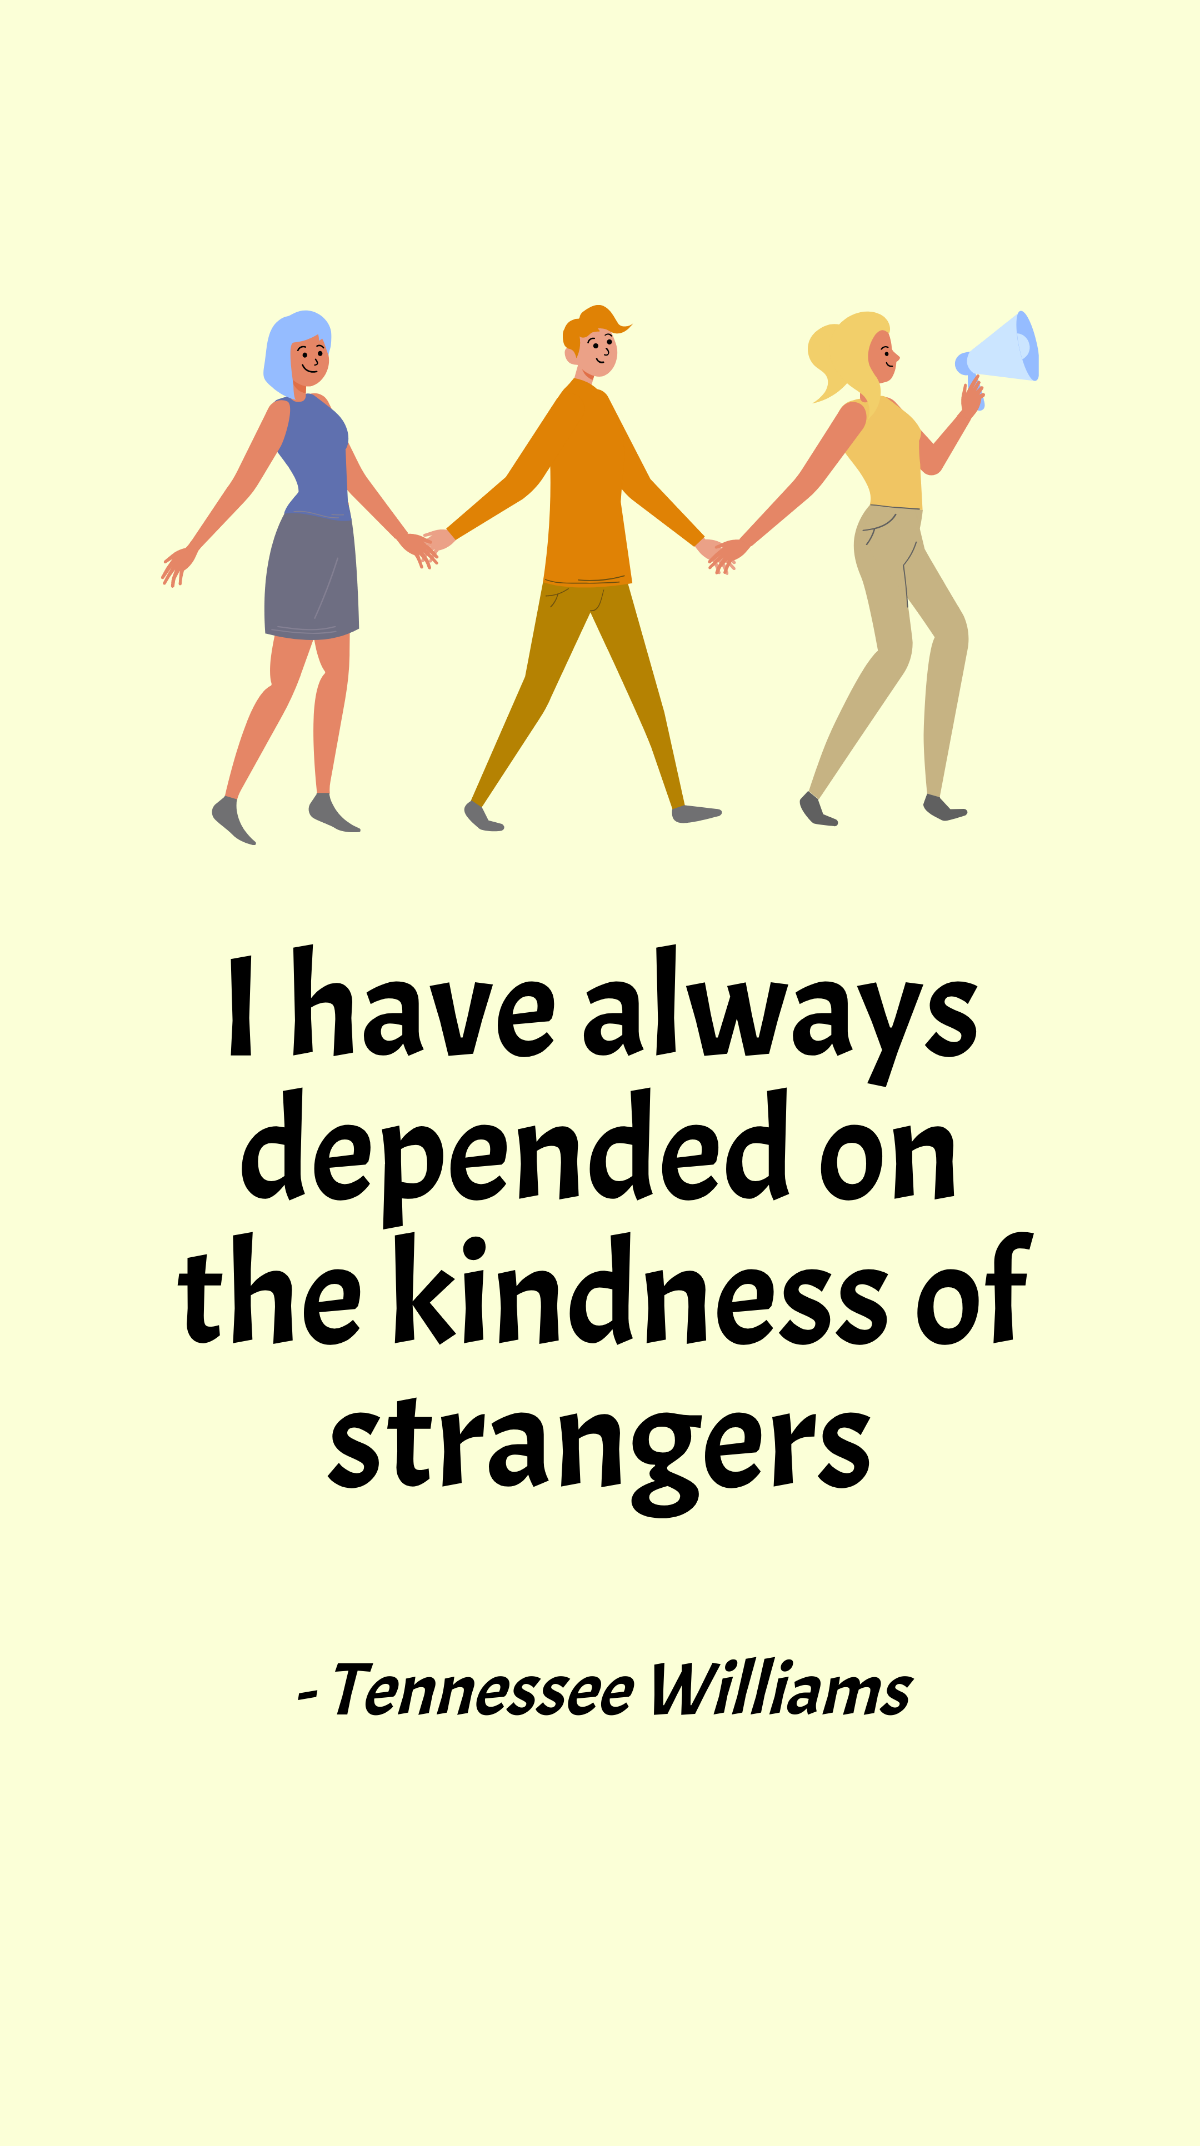 Tennessee Williams - I have always depended on the kindness of strangers Template